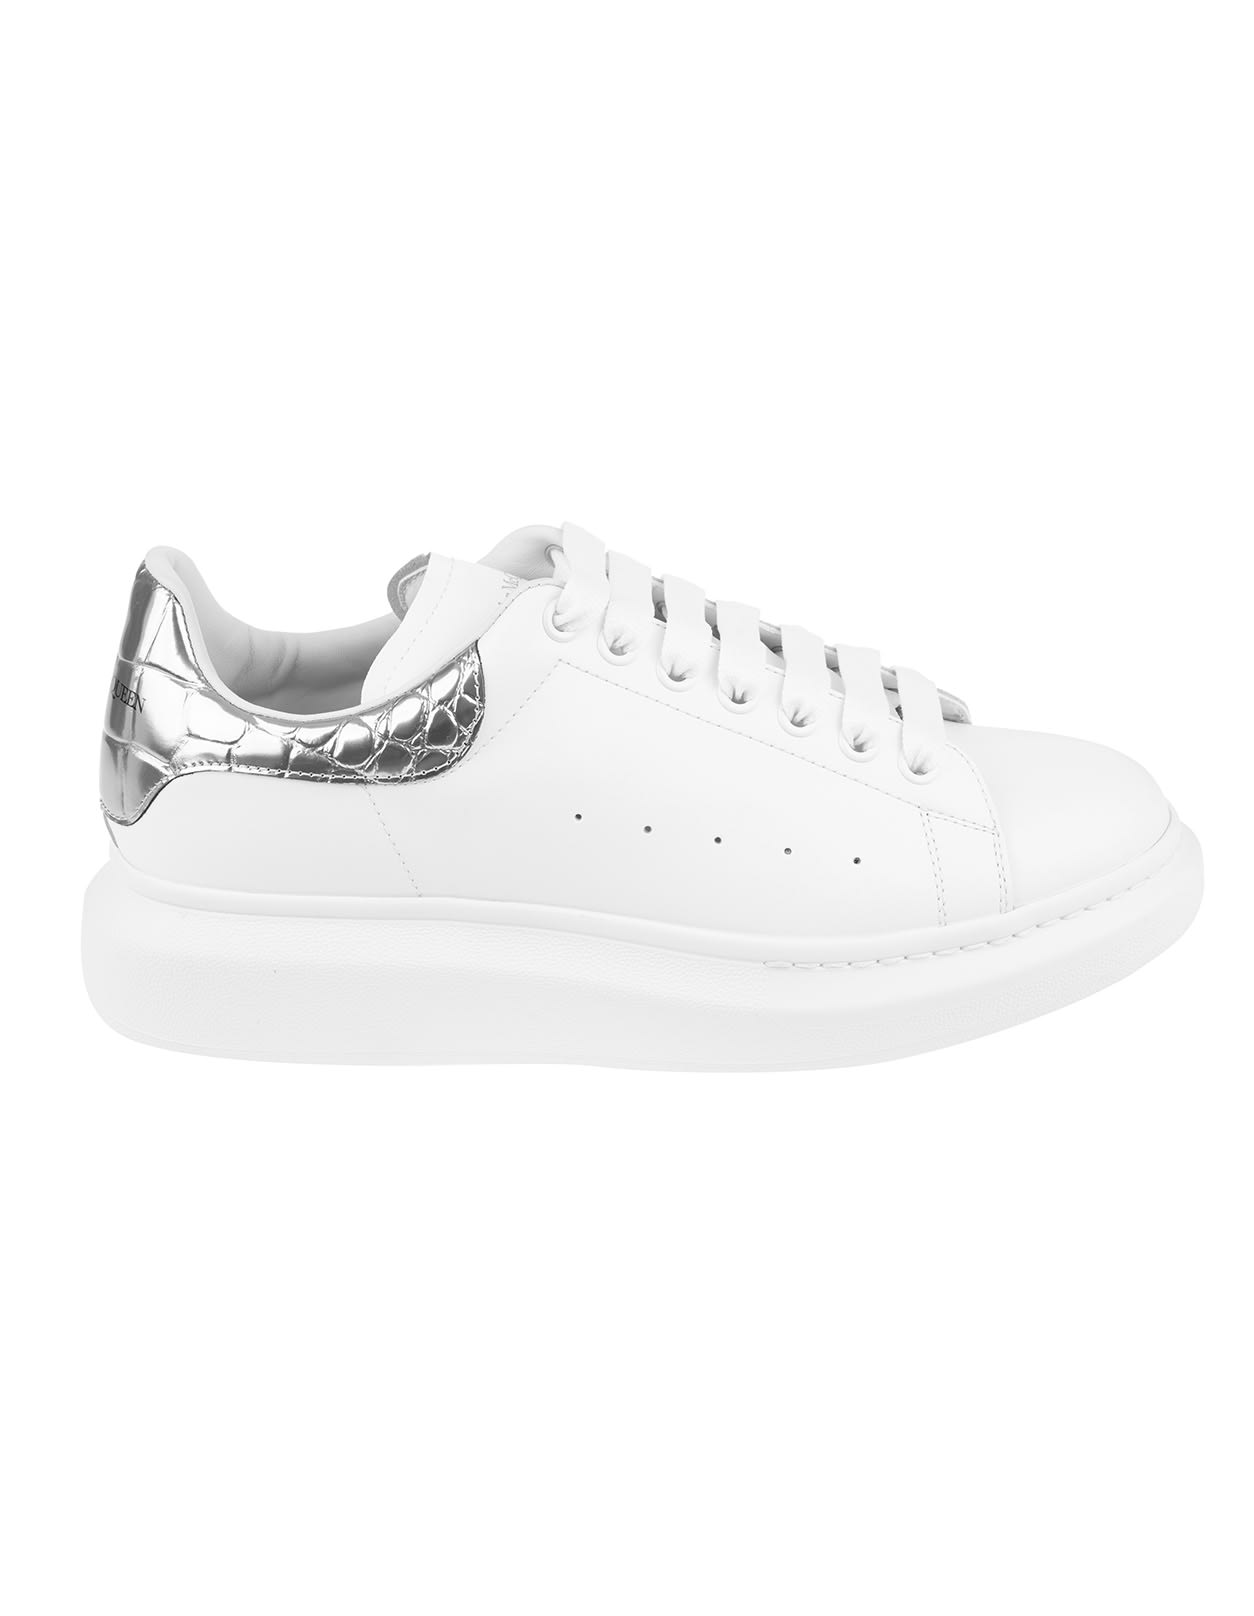 Alexander Mcqueen Man White Oversize Sneakers With Silver Crocodile Effect Spoiler In White/silver